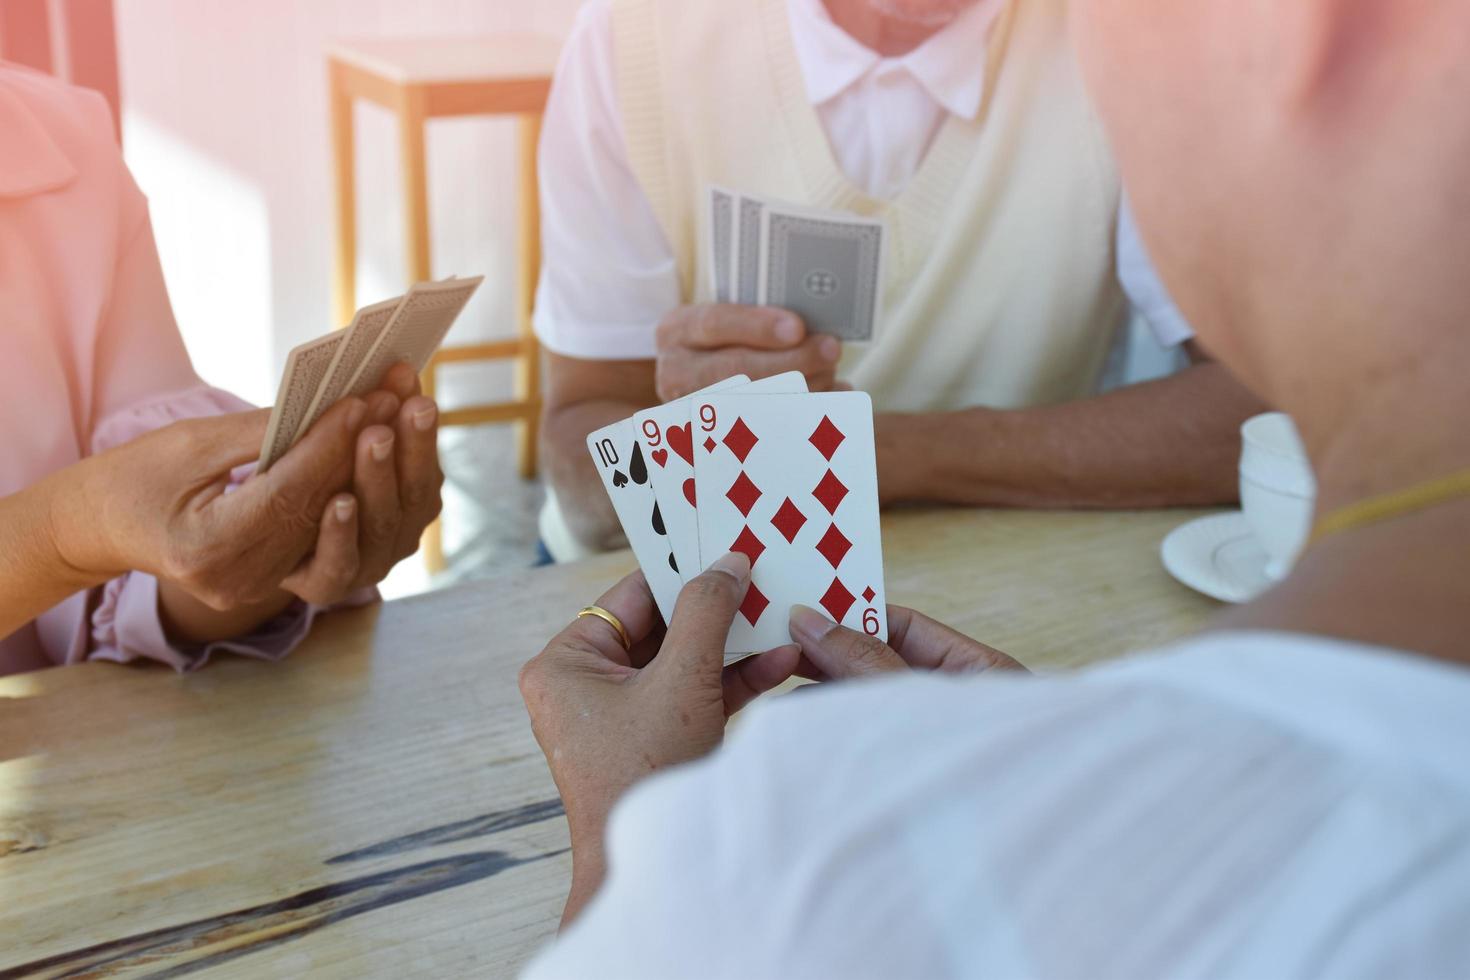 Card playing of elderly people at home in their freetimes, recreation and happiness of elderly people concept. photo